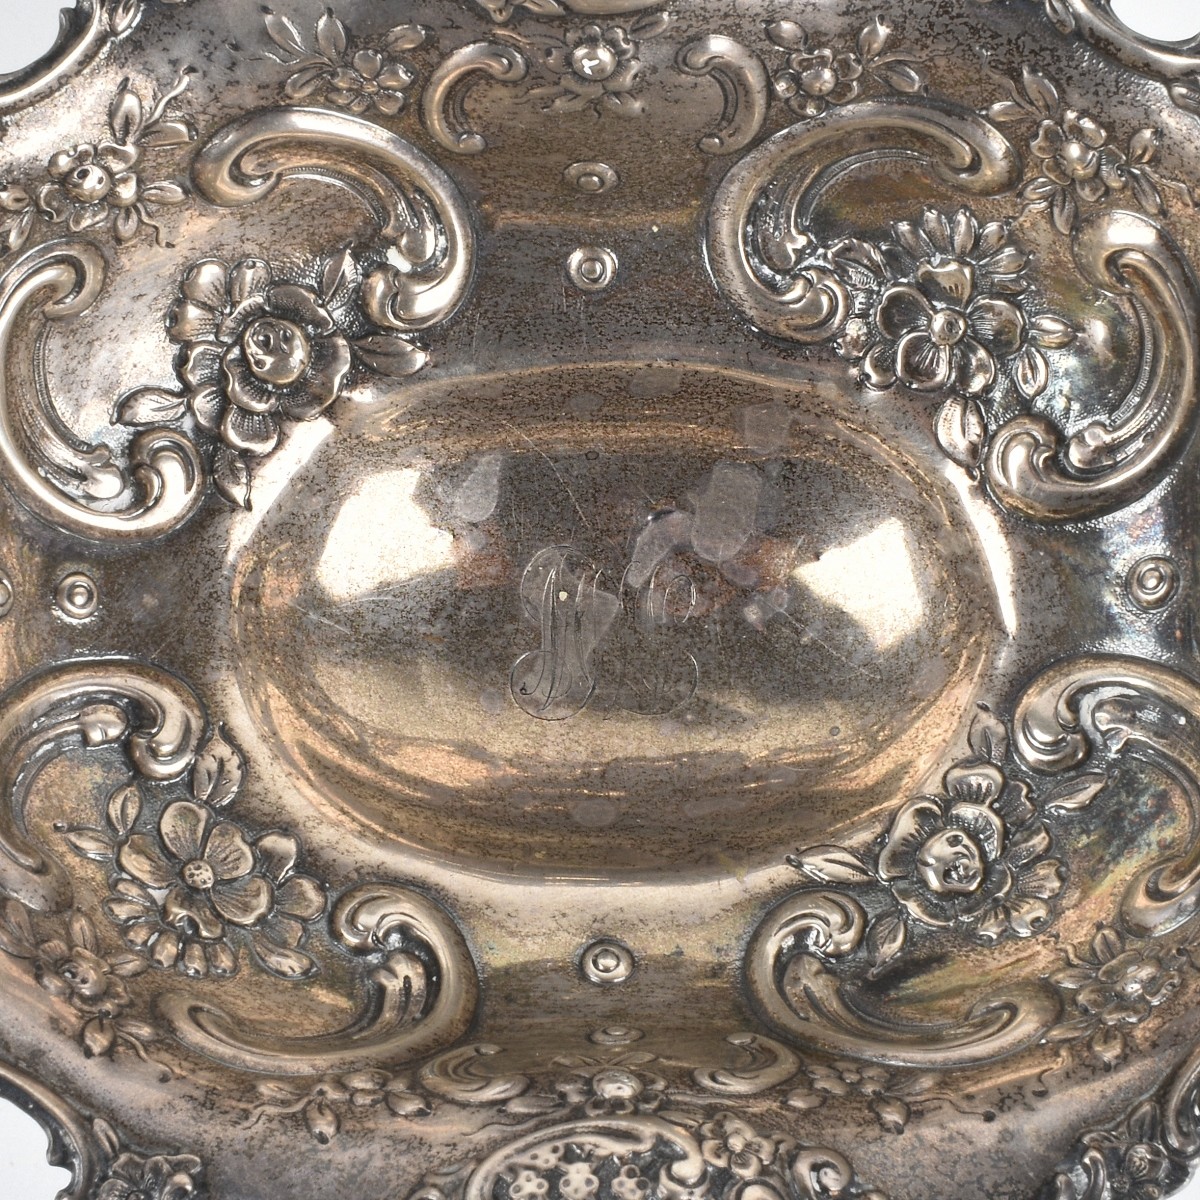 Antique Tiffany & Co. Sterling Silver Bowl